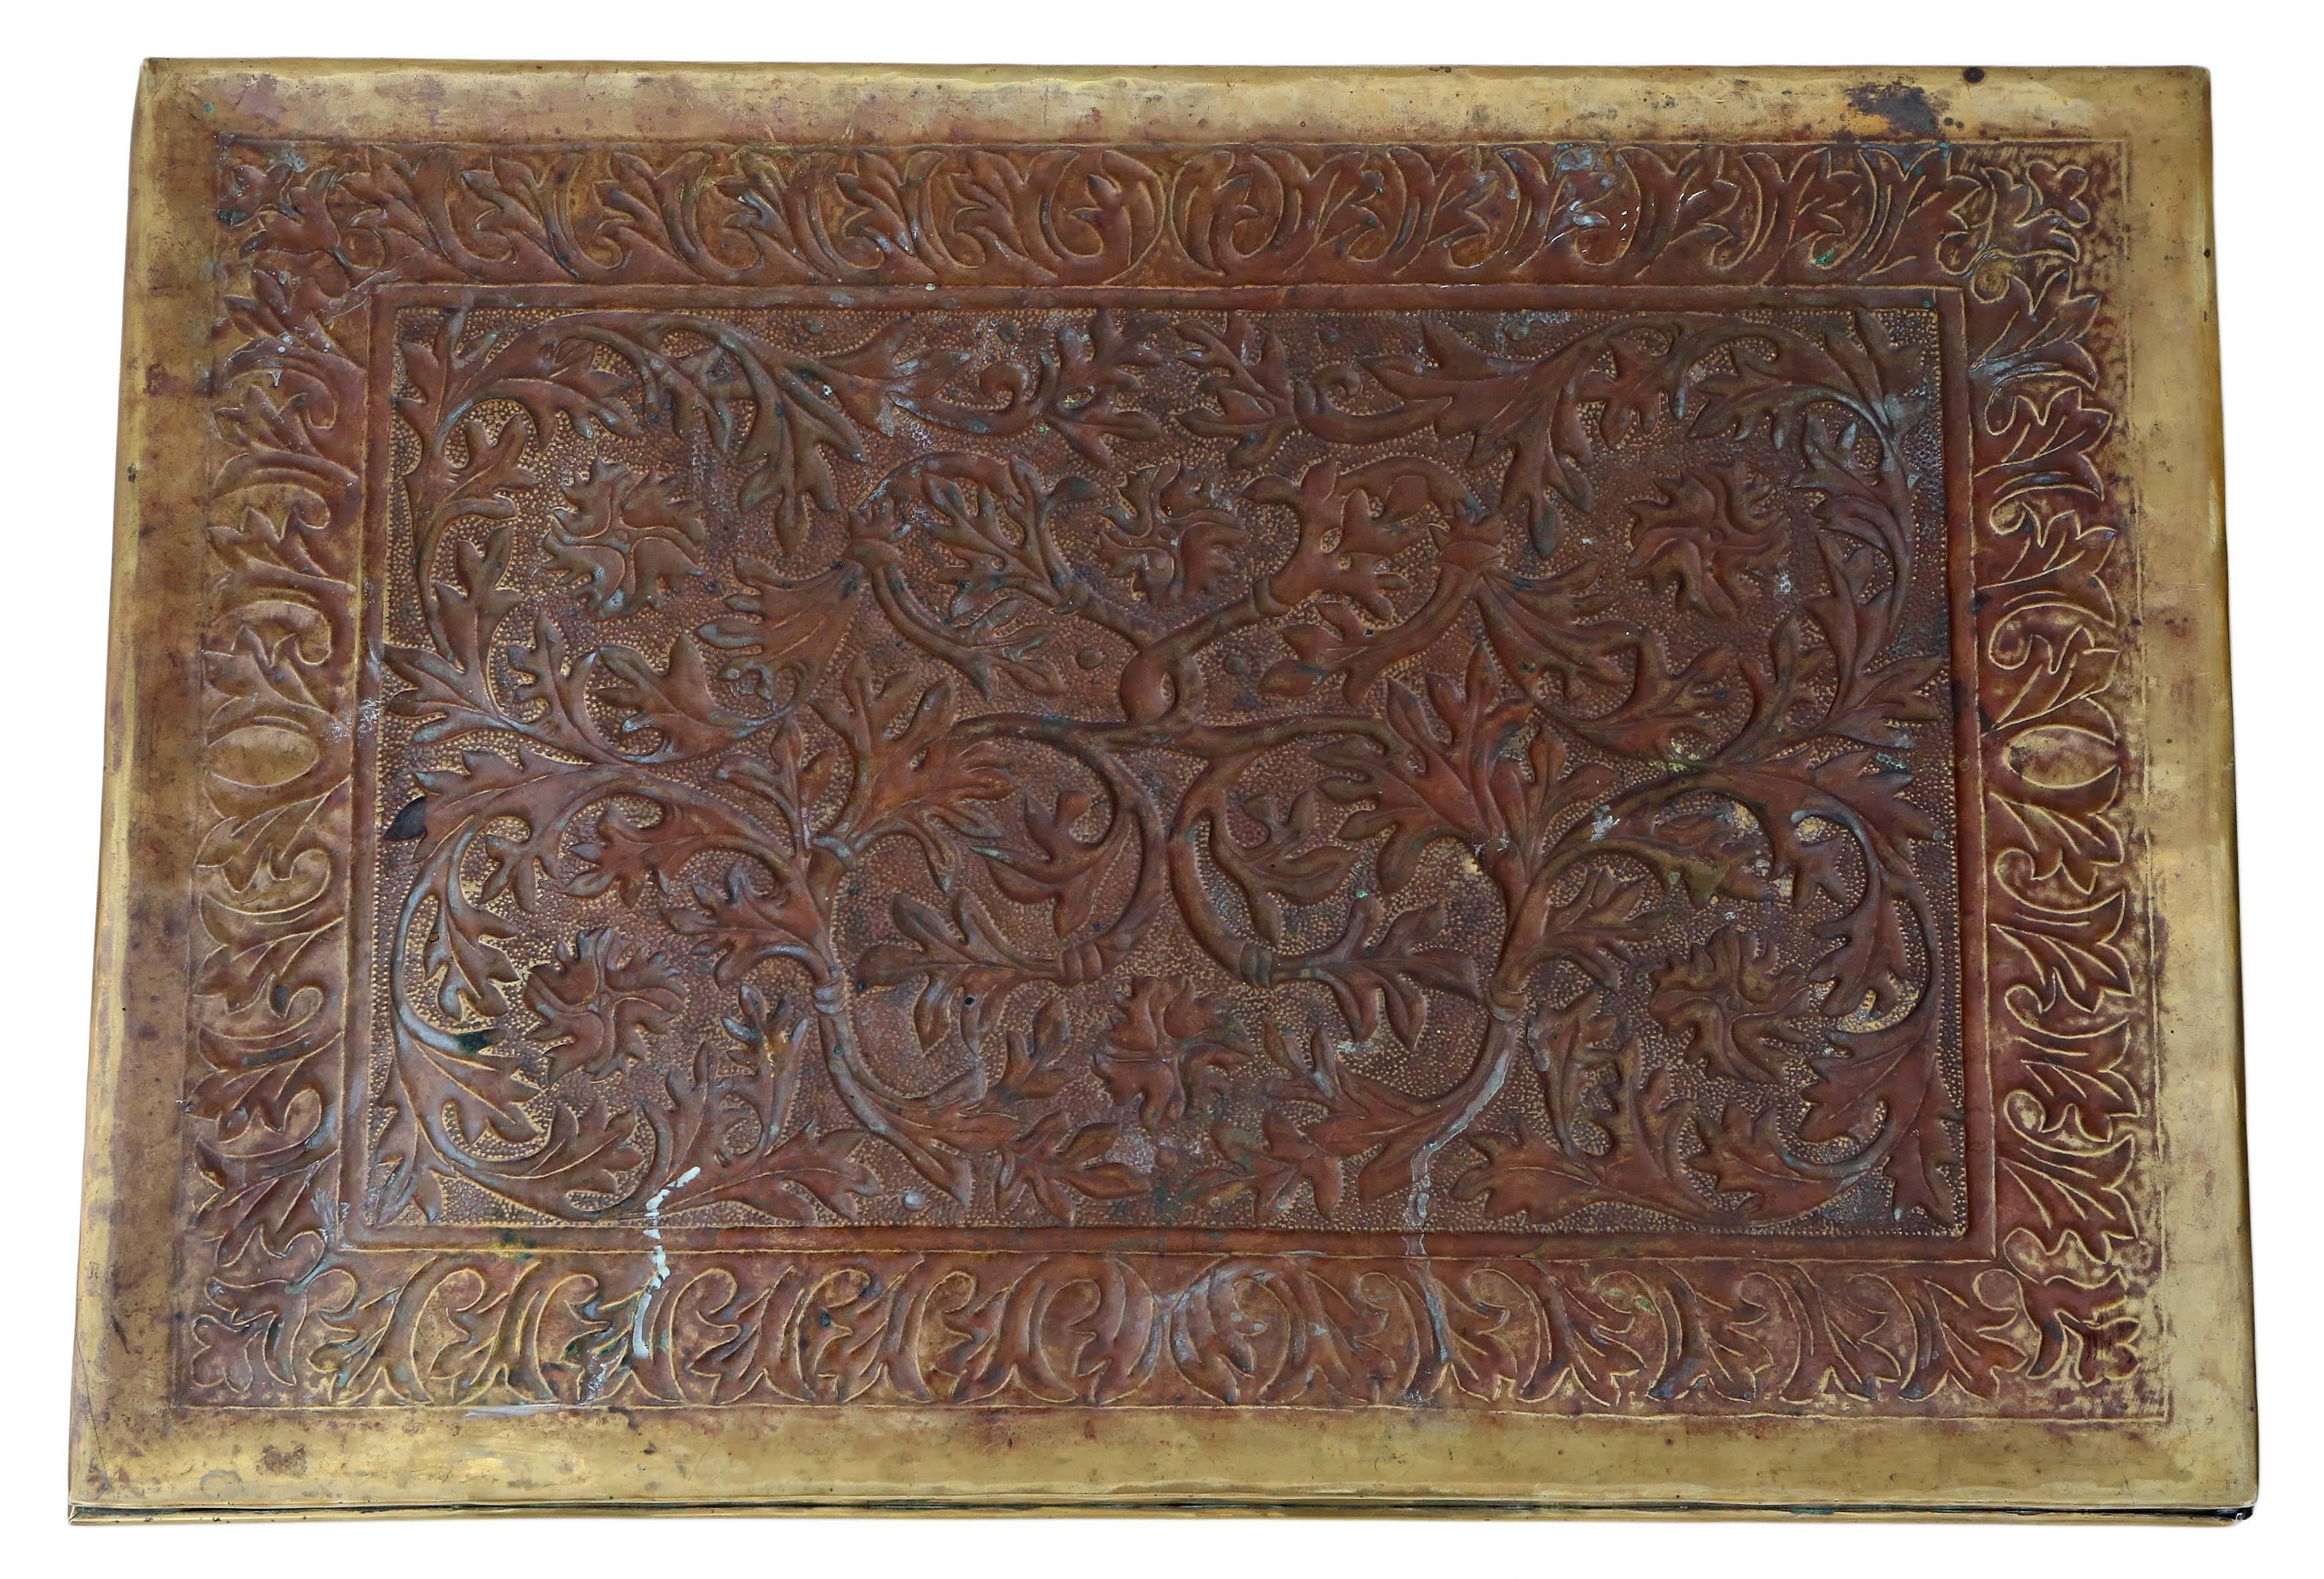 British Antique Quality circa 1920 Keswick School of Industrial Art Brass Serving Tray For Sale